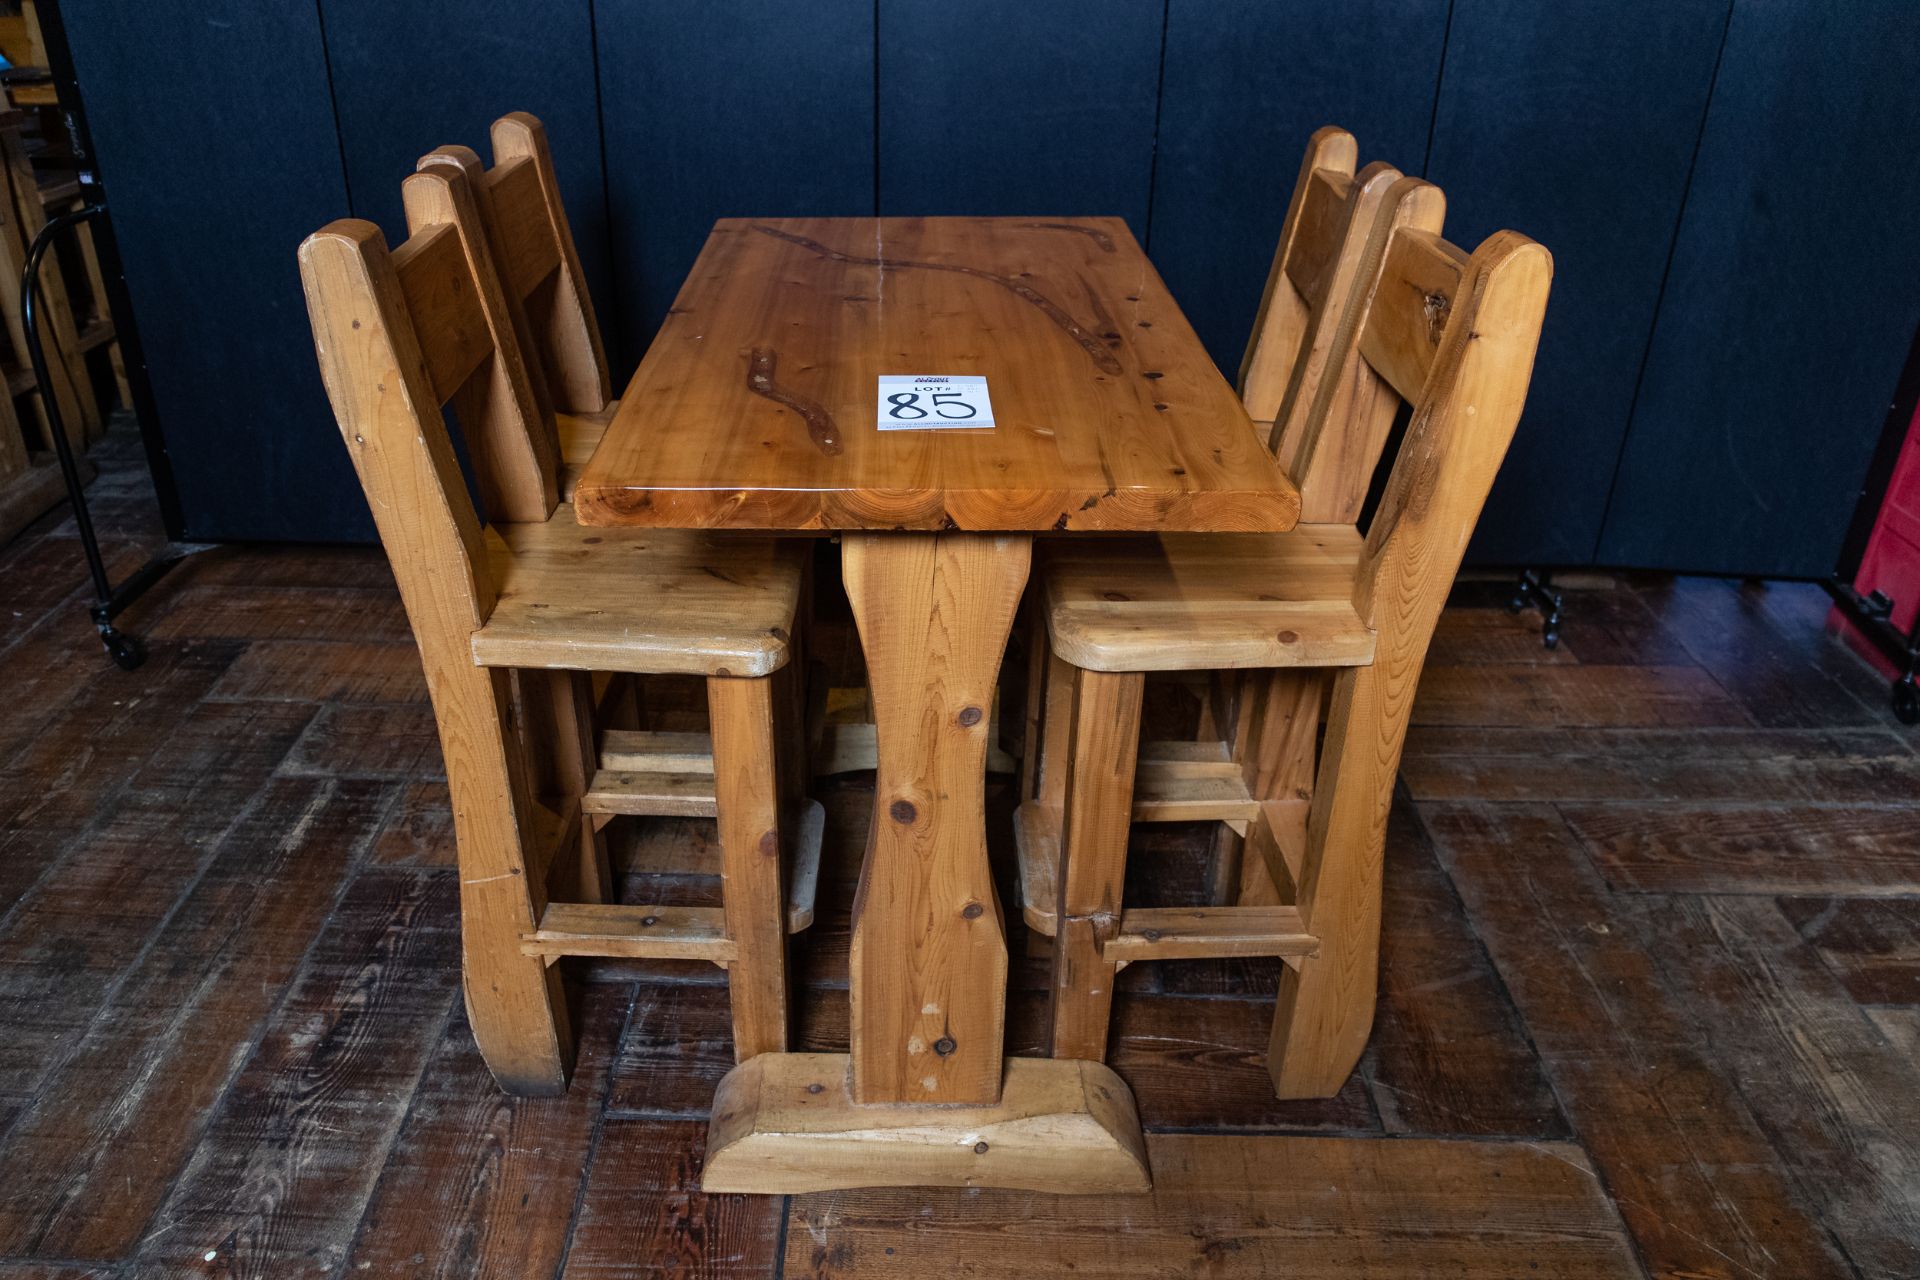 PUB TABLE WITH FOUR CHAIRS - TABLE L 48" W 29 1/2" H 41"